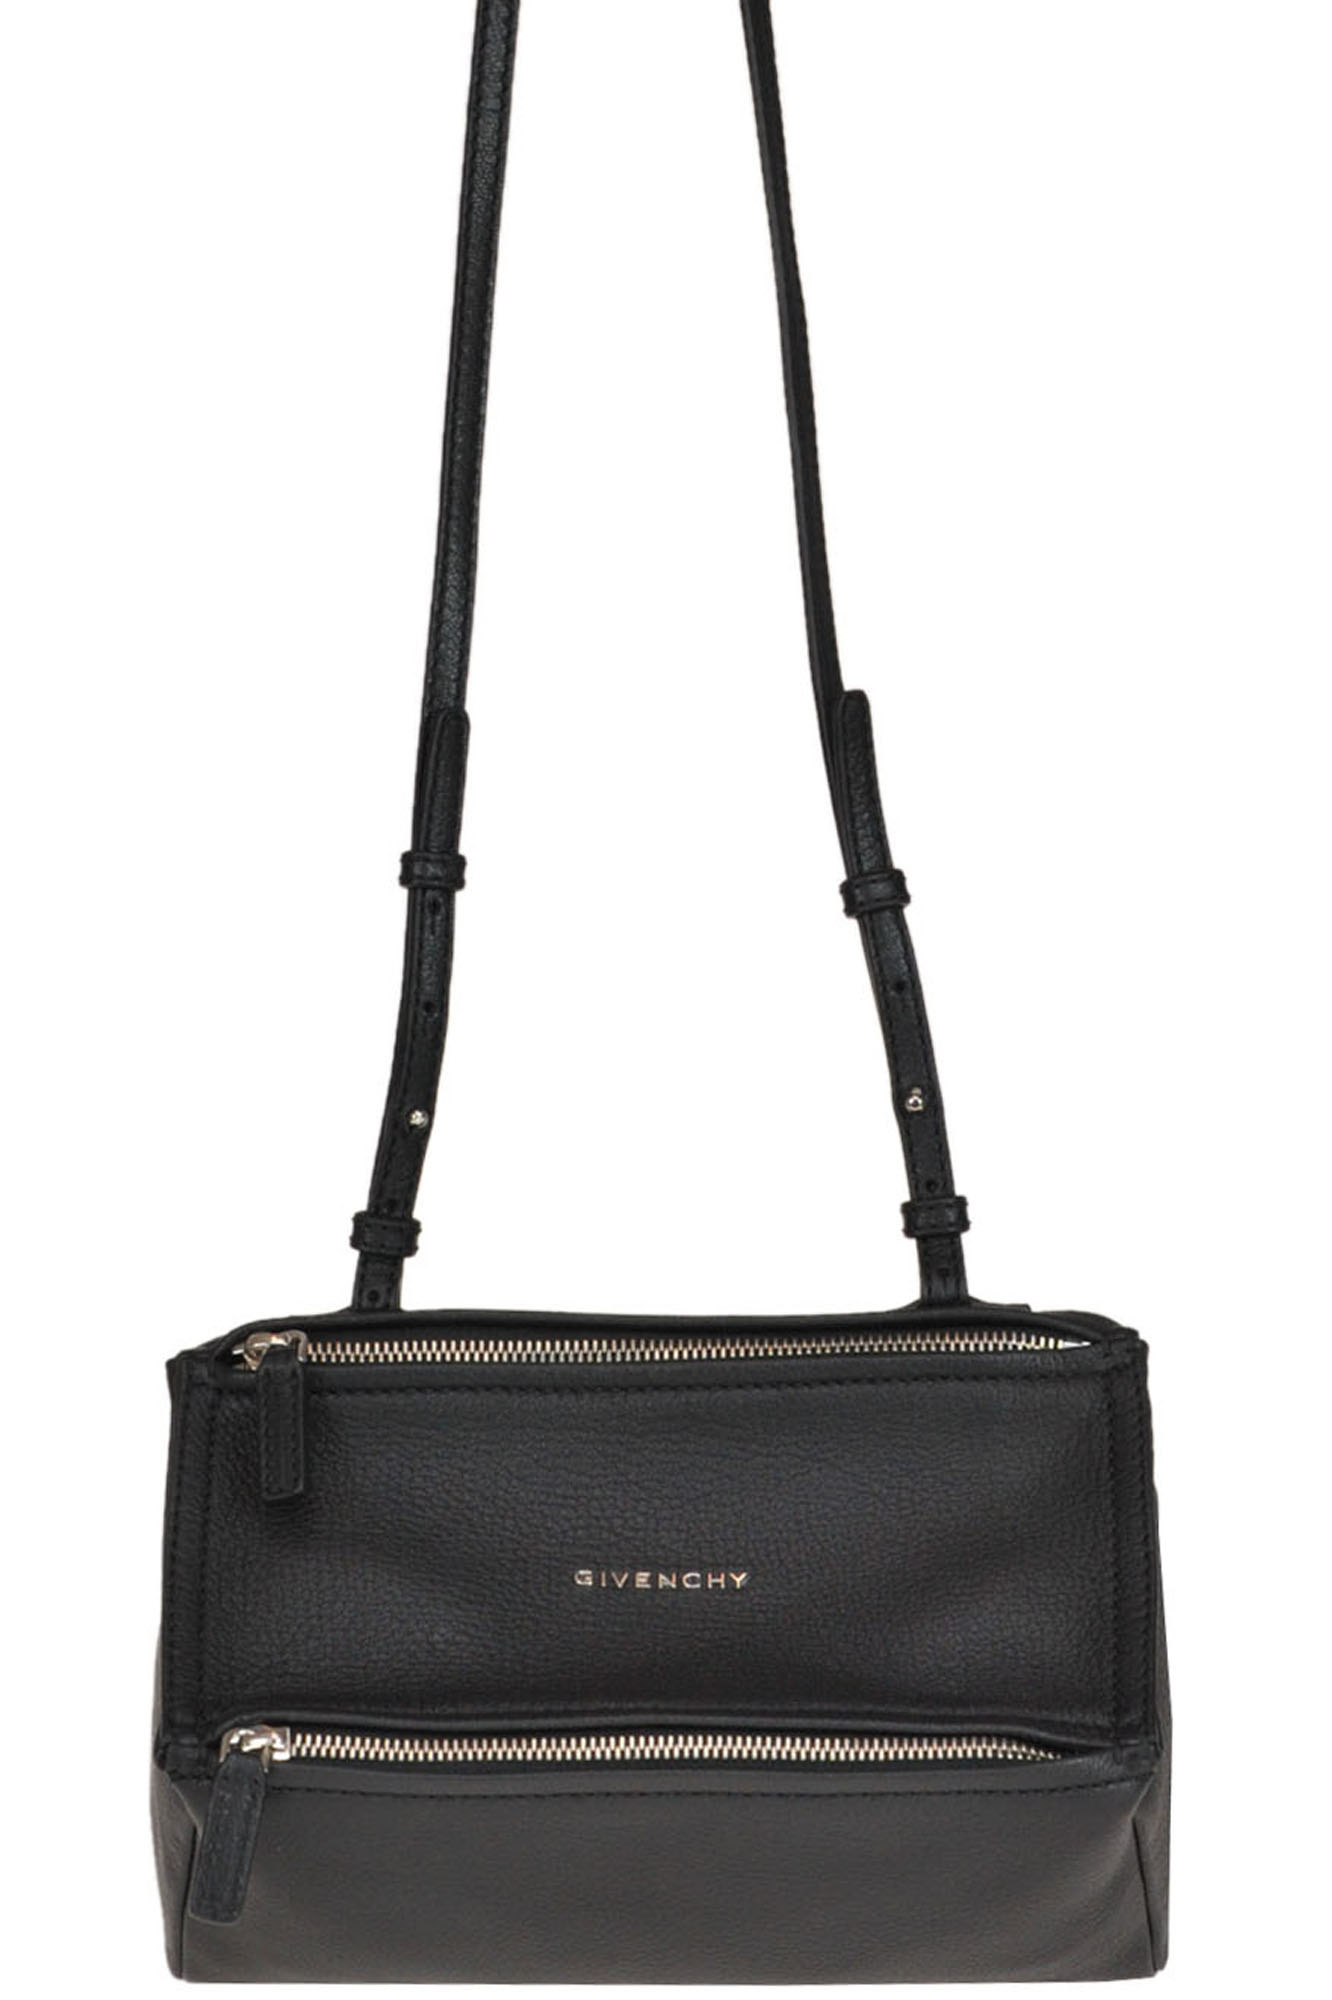 Givenchy Pandora Grainy Leather Bag In Black